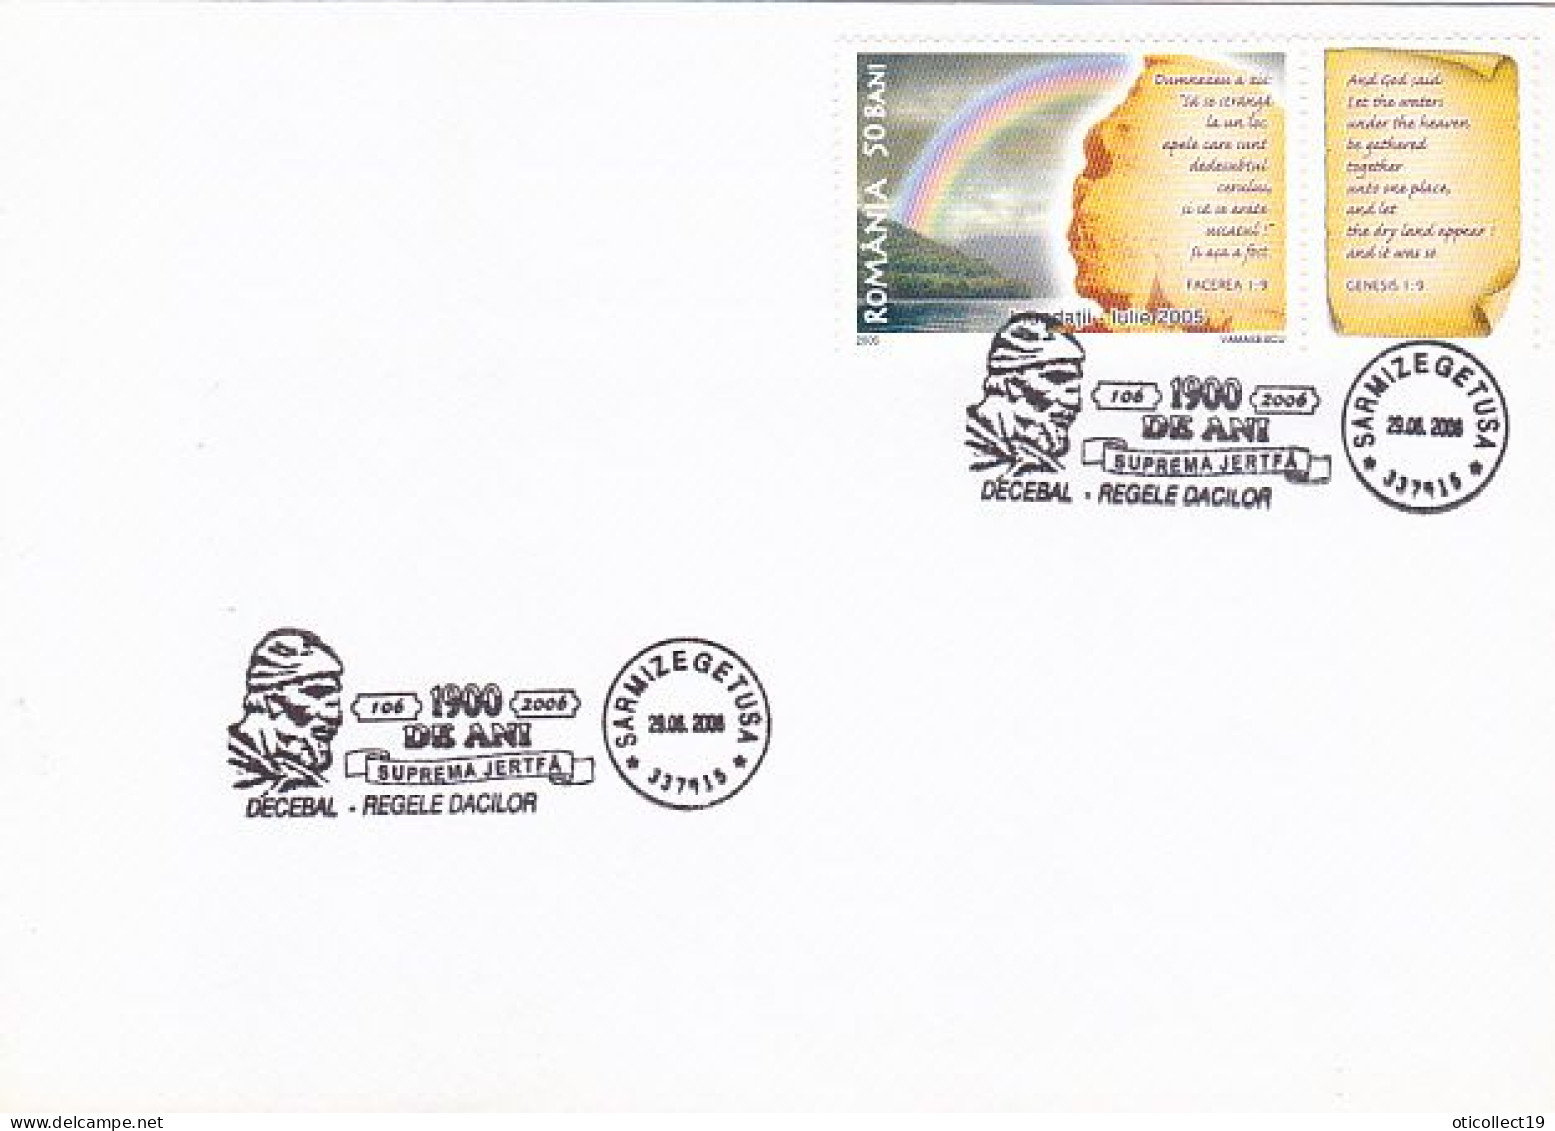 KING DECEBALUS OF DACIA SPECIAL POSTMARKS, 2005 FLOODS RELIEF STAMP ON COVER, 2006, ROMANIA - Covers & Documents